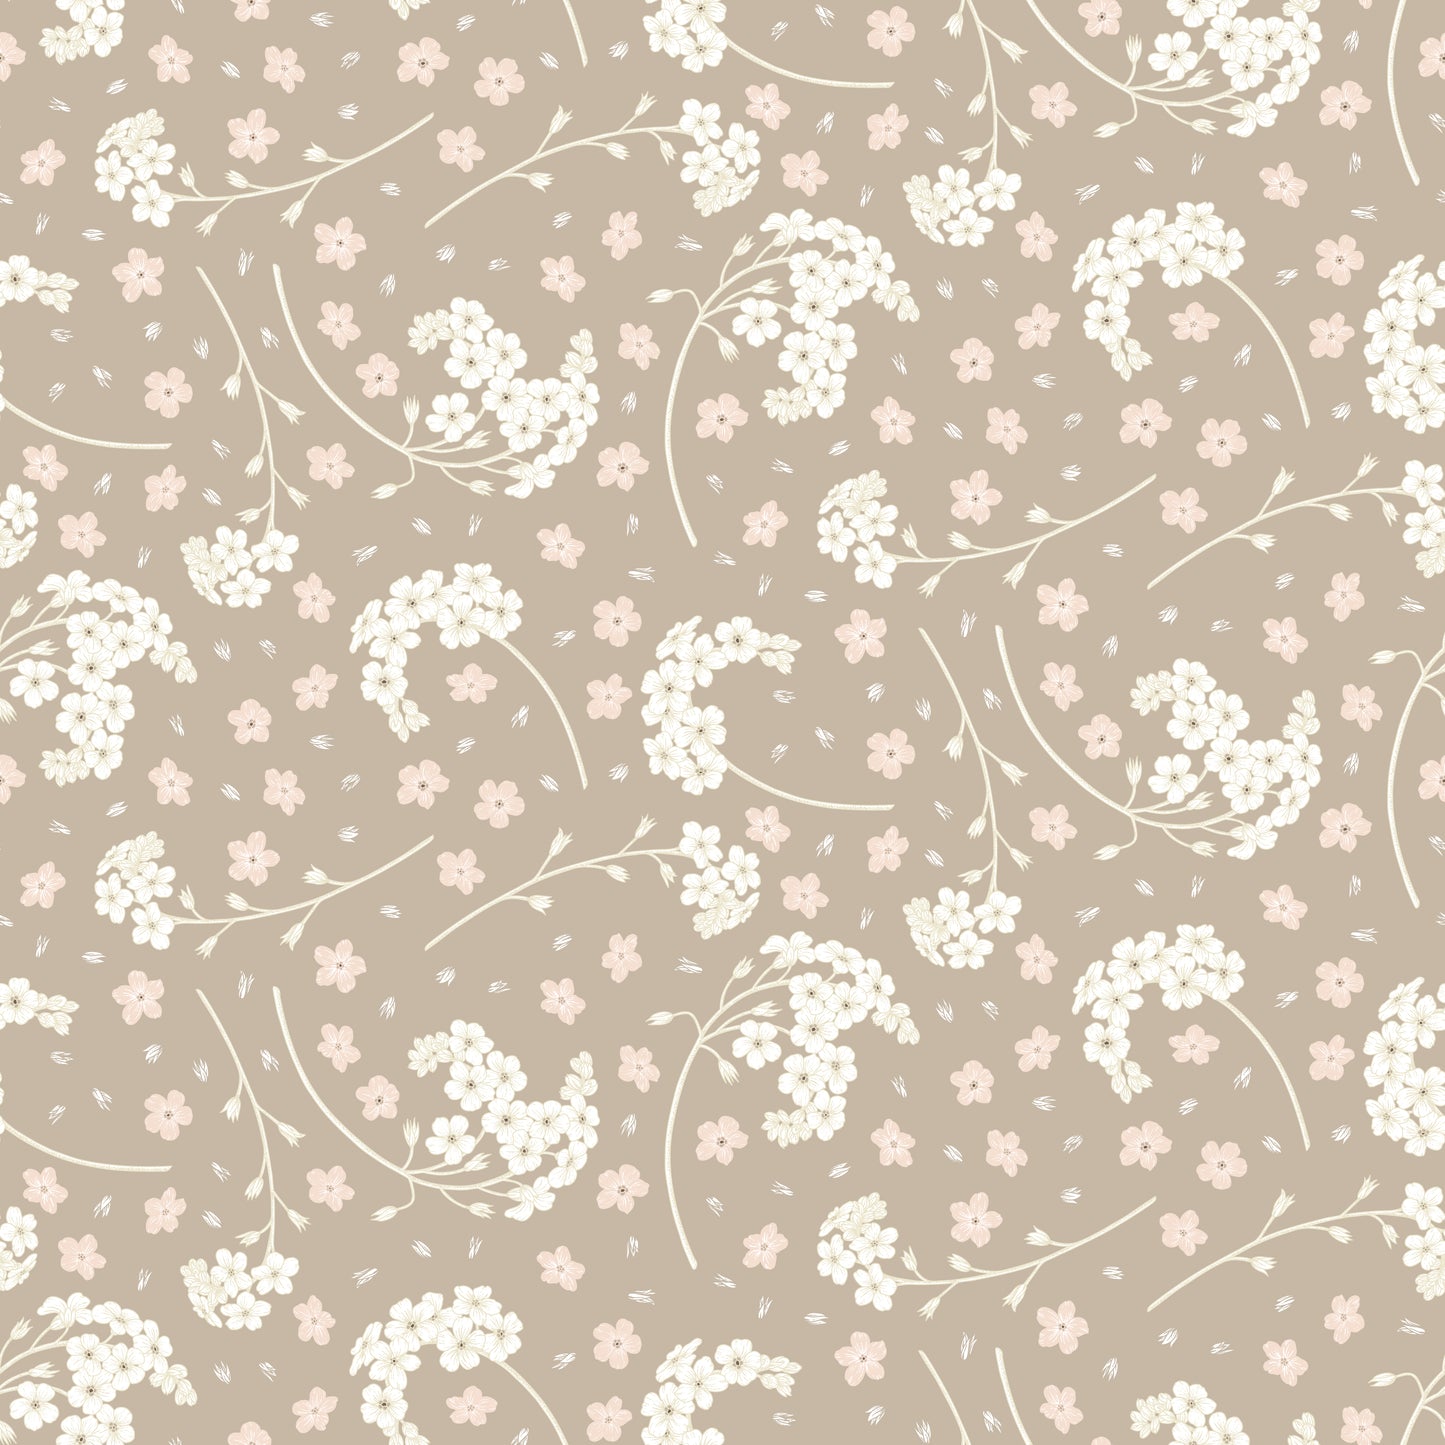 White forget me not flower print on cream/beige background easy to install and remove peel and stick custom wallpaper available in different lengths/sizes locally created and printed in Canada. Removable, washable, durable, commercial grade, customizable and water proof.